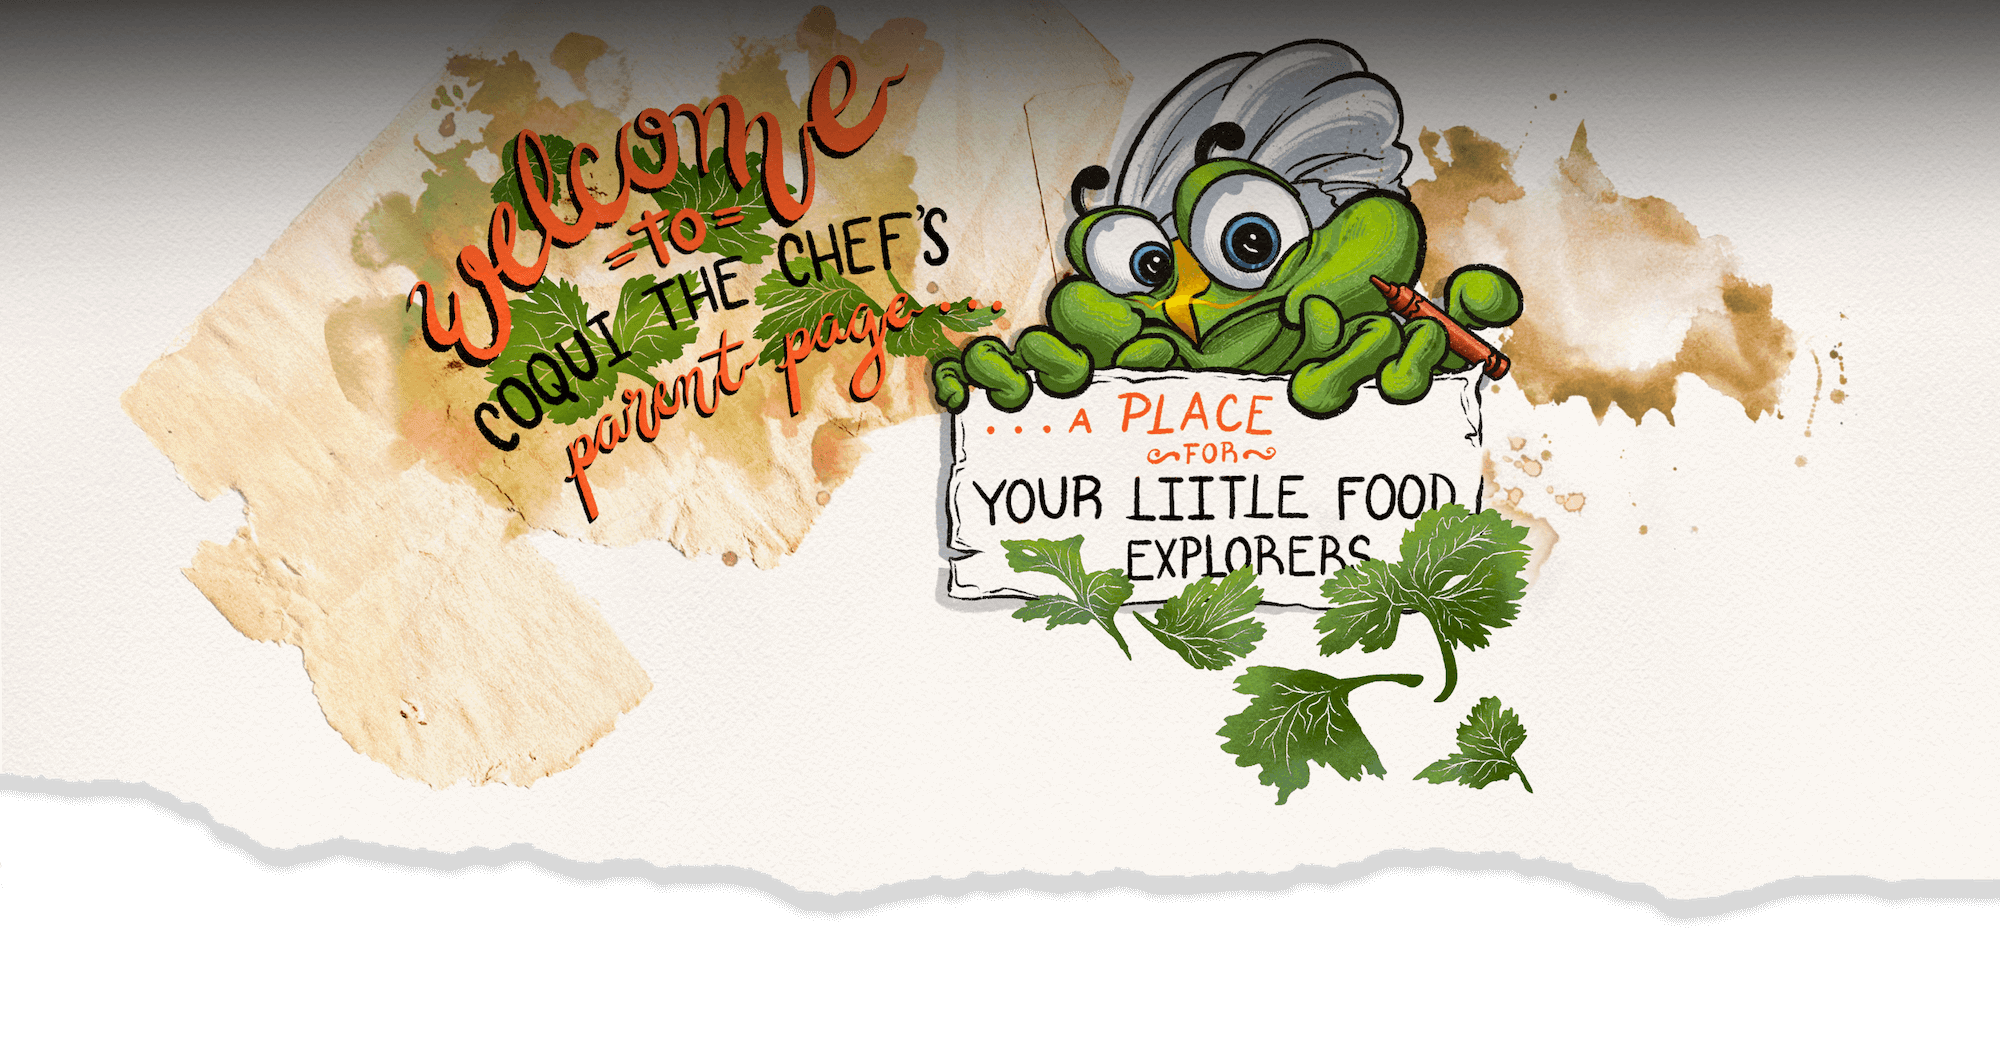 A colorful banner with an overlay text ‘Welcome to Coqui the Chef's parent page, a place for your little food explorers'.